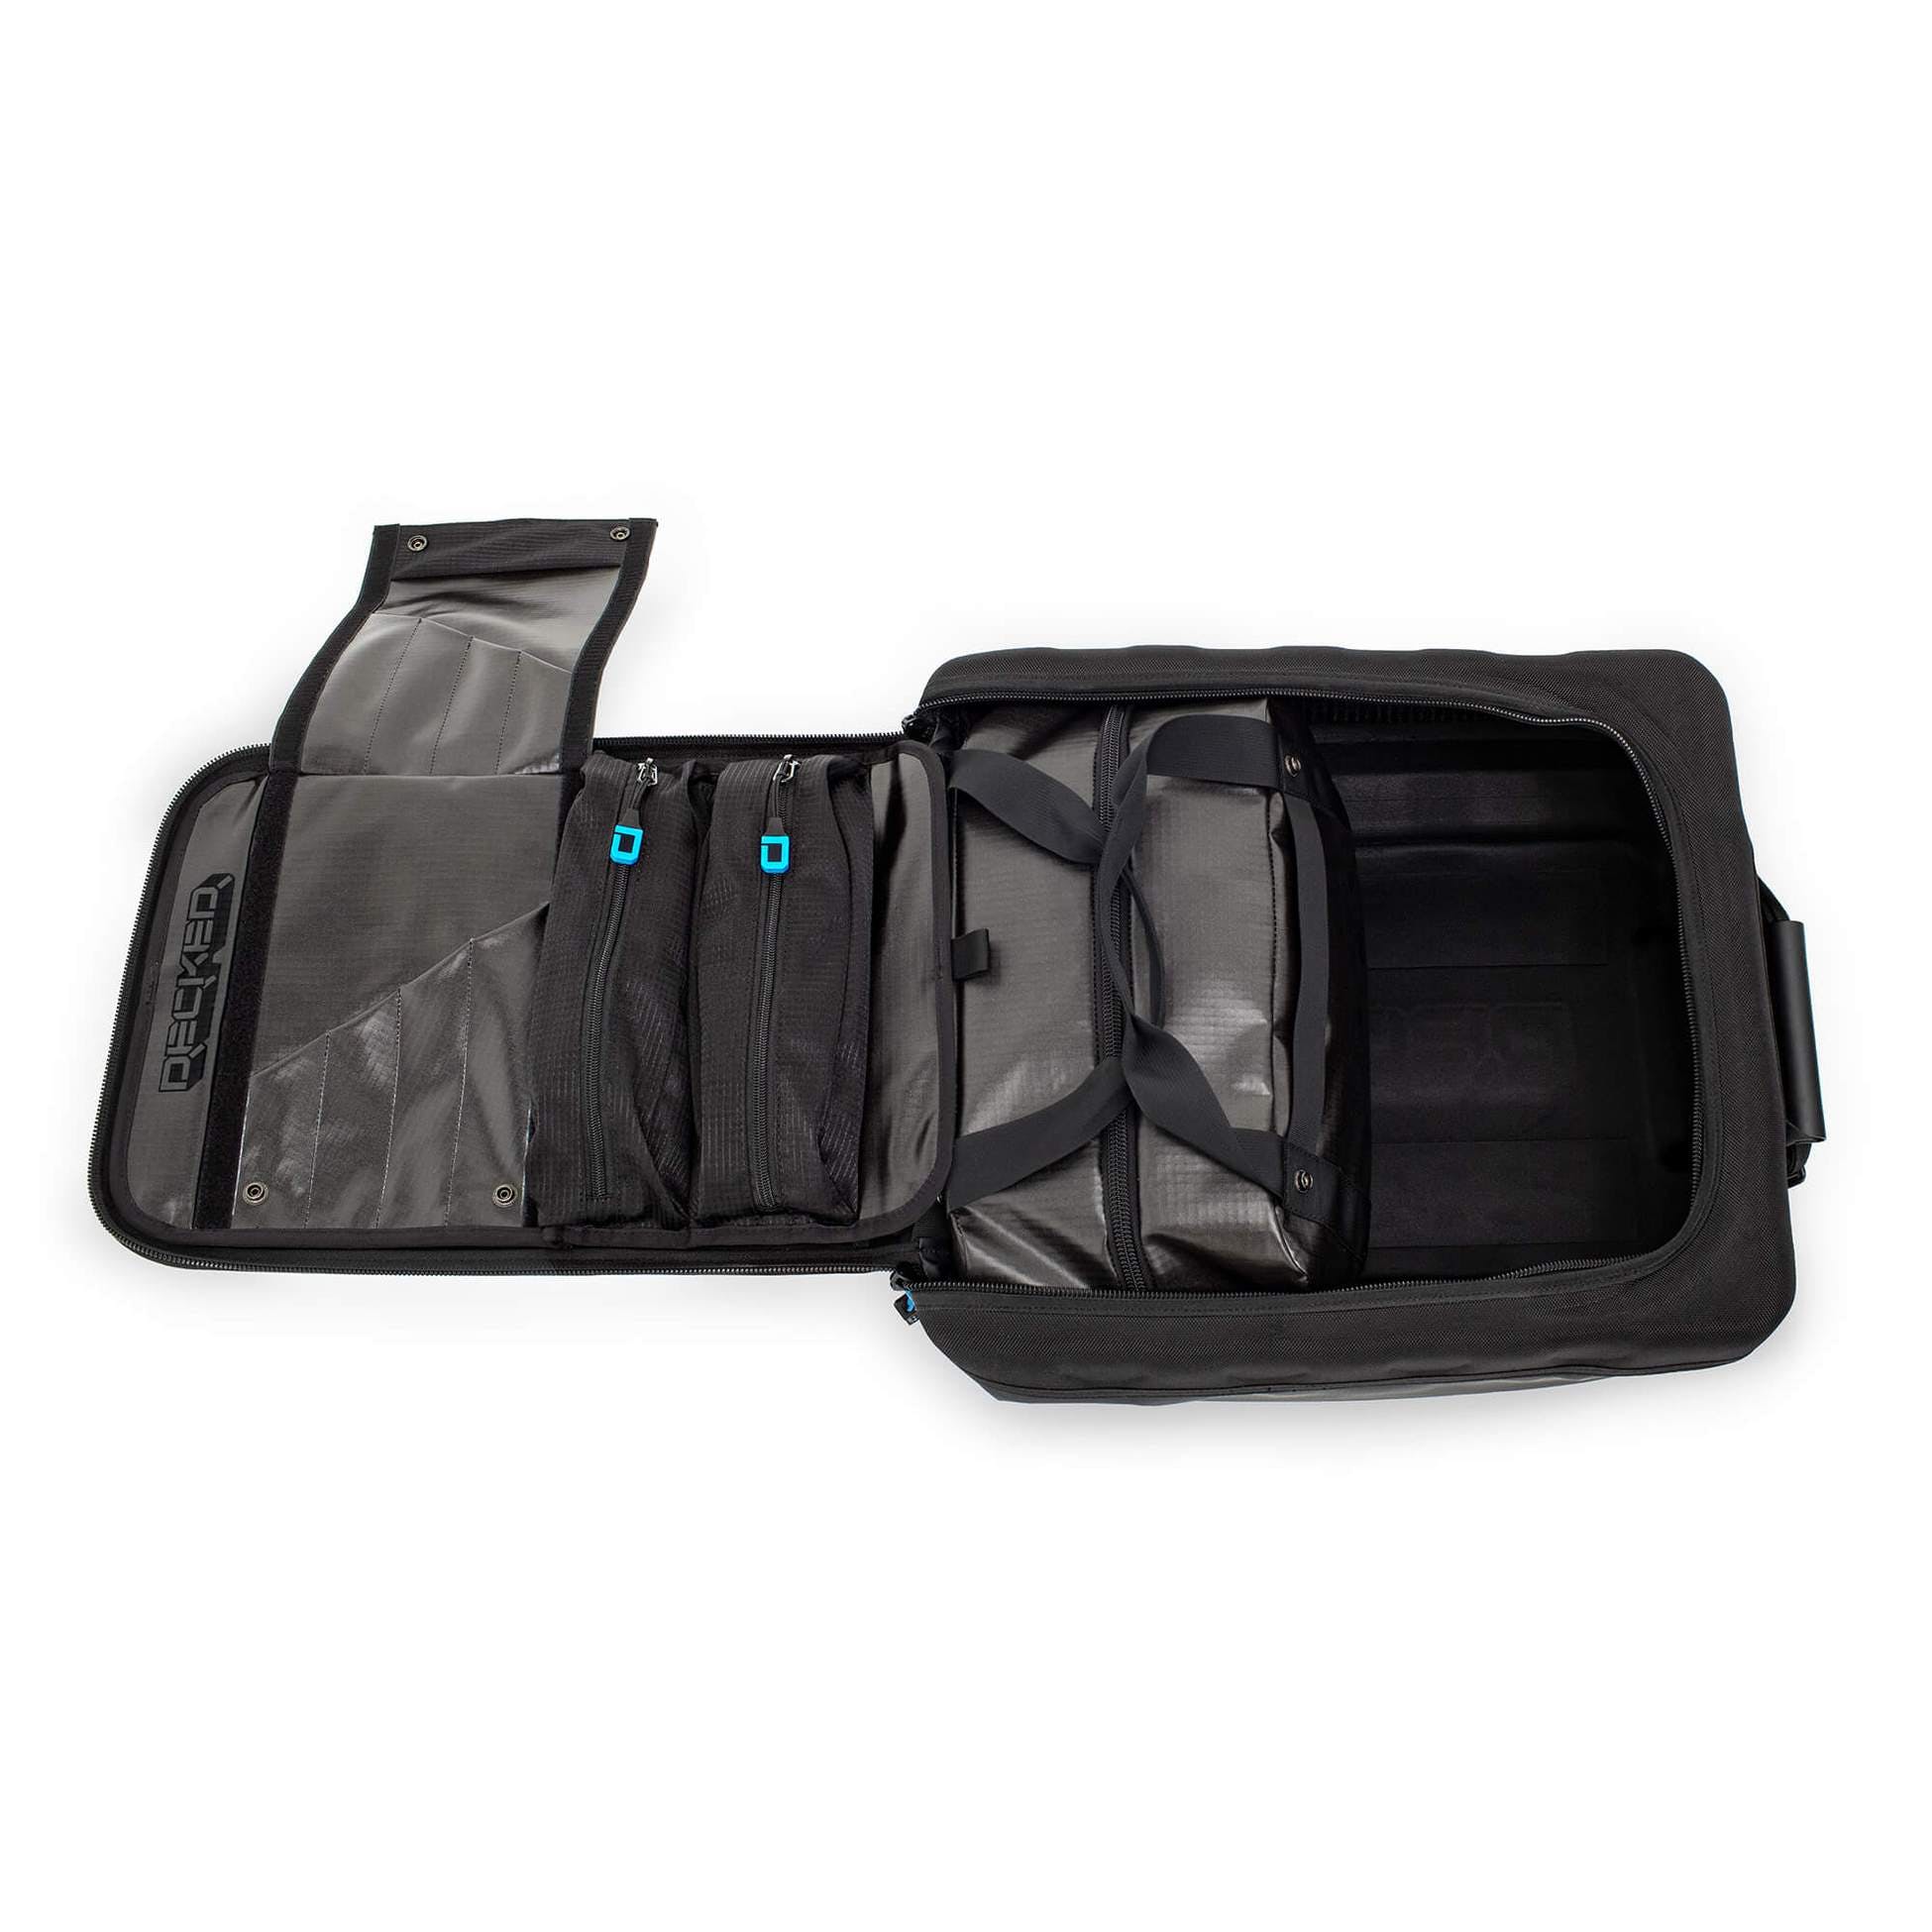 DECKED AD14 D-Bag - drawer bag - includes tool roll and small duffel bag